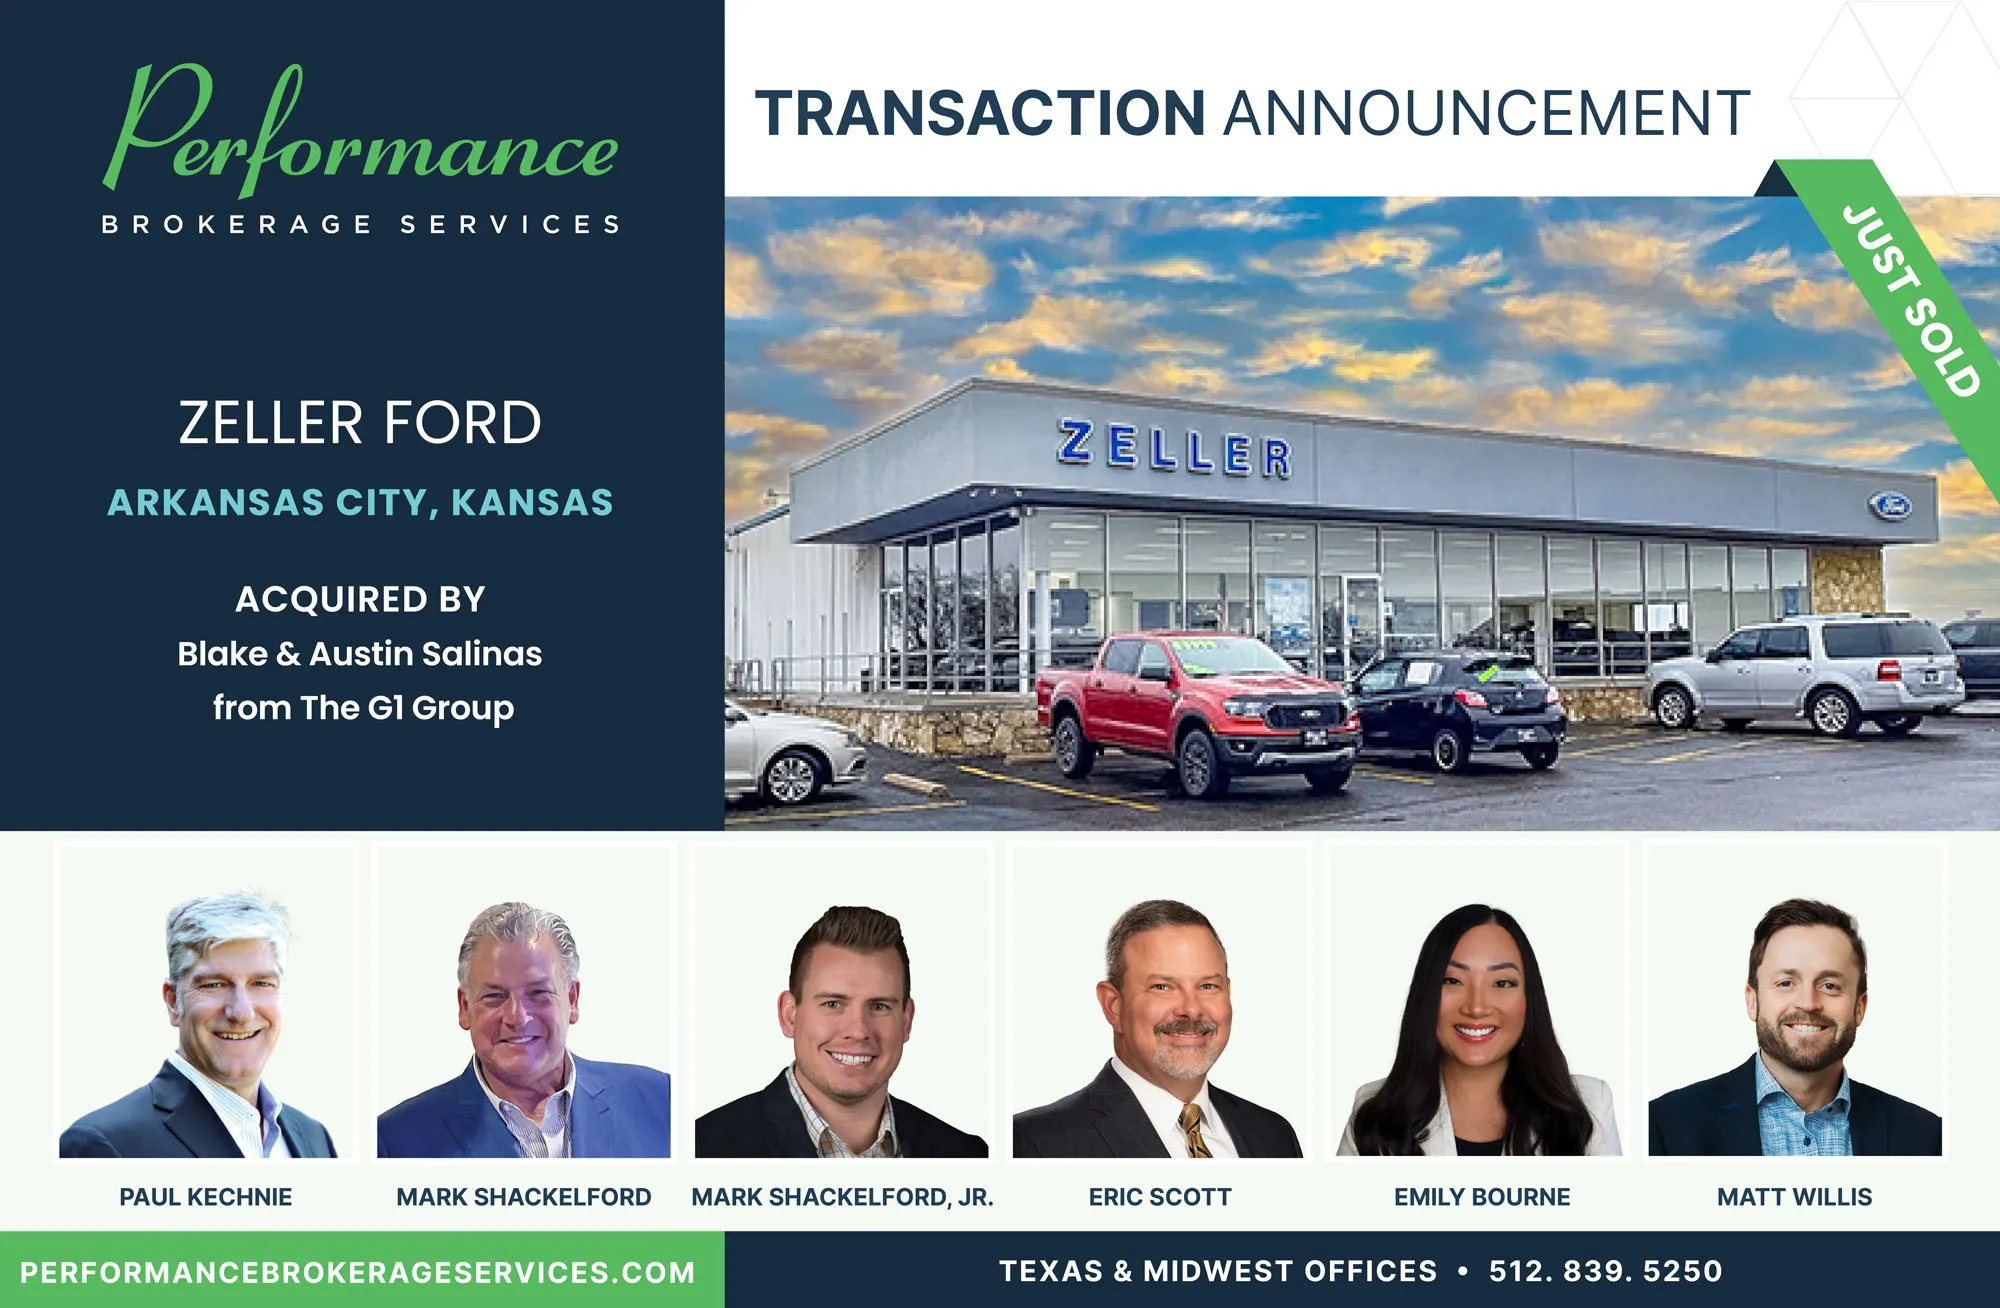 zeller-ford-arkansas-kansas-sells-to-blake-and-austin-salinas-from-the-g1-group-with-performance-brokerage